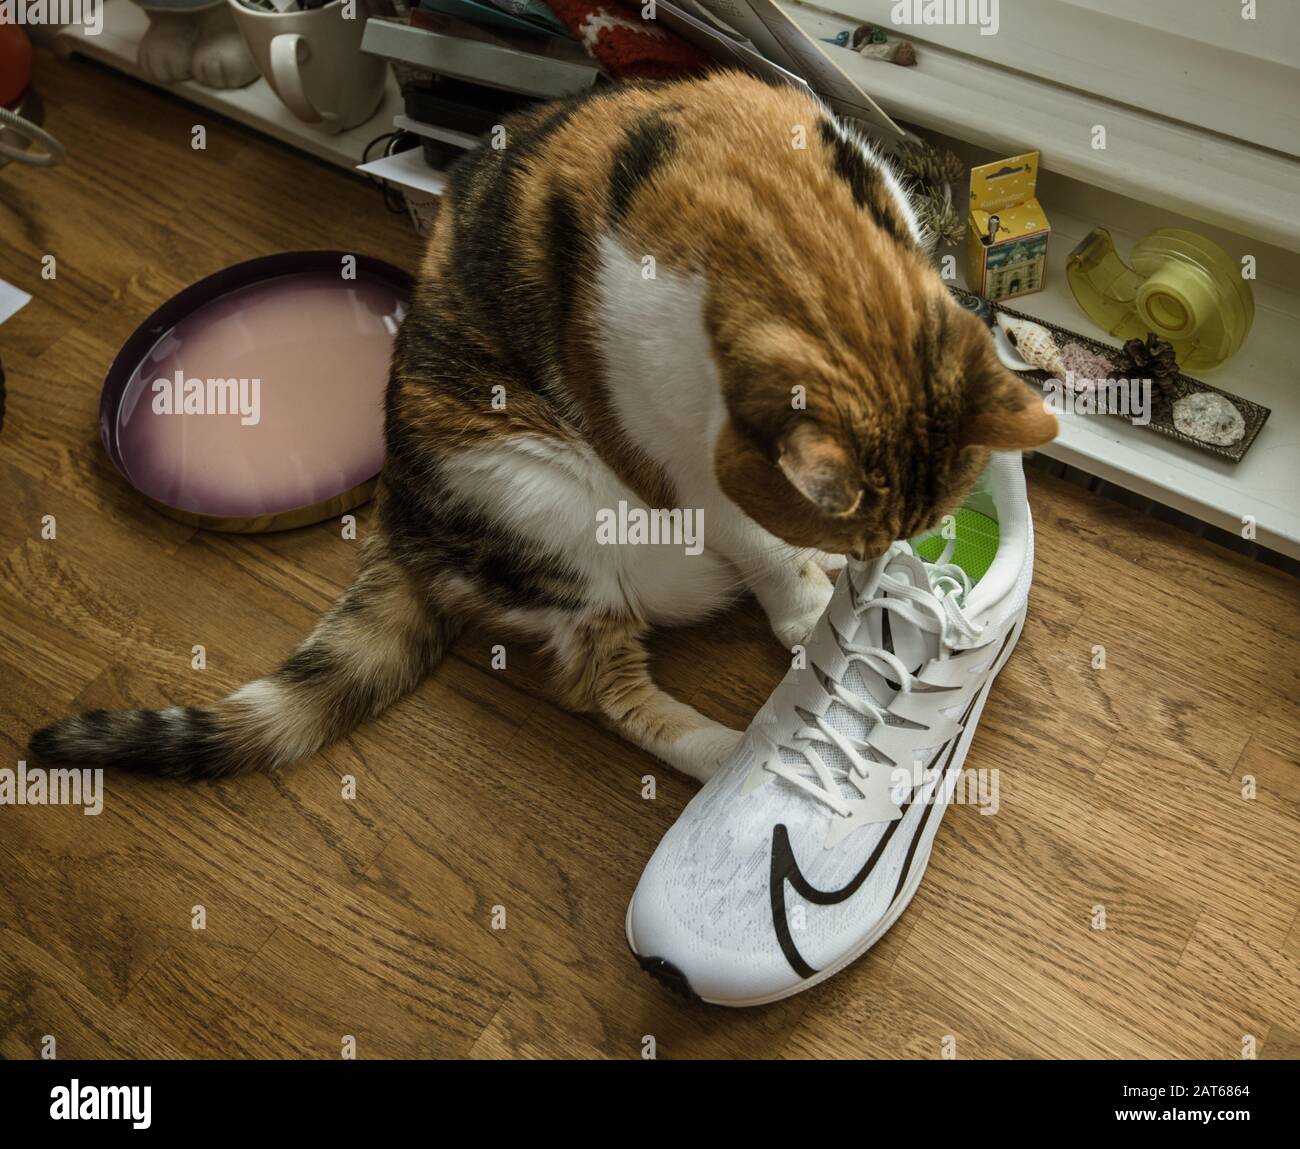 Paris, France - Sep 23, 2019: Overhead view cat looking inspecting  professional running shoes manufactured by Nike Zoom Rival Fly for women  Stock Photo - Alamy